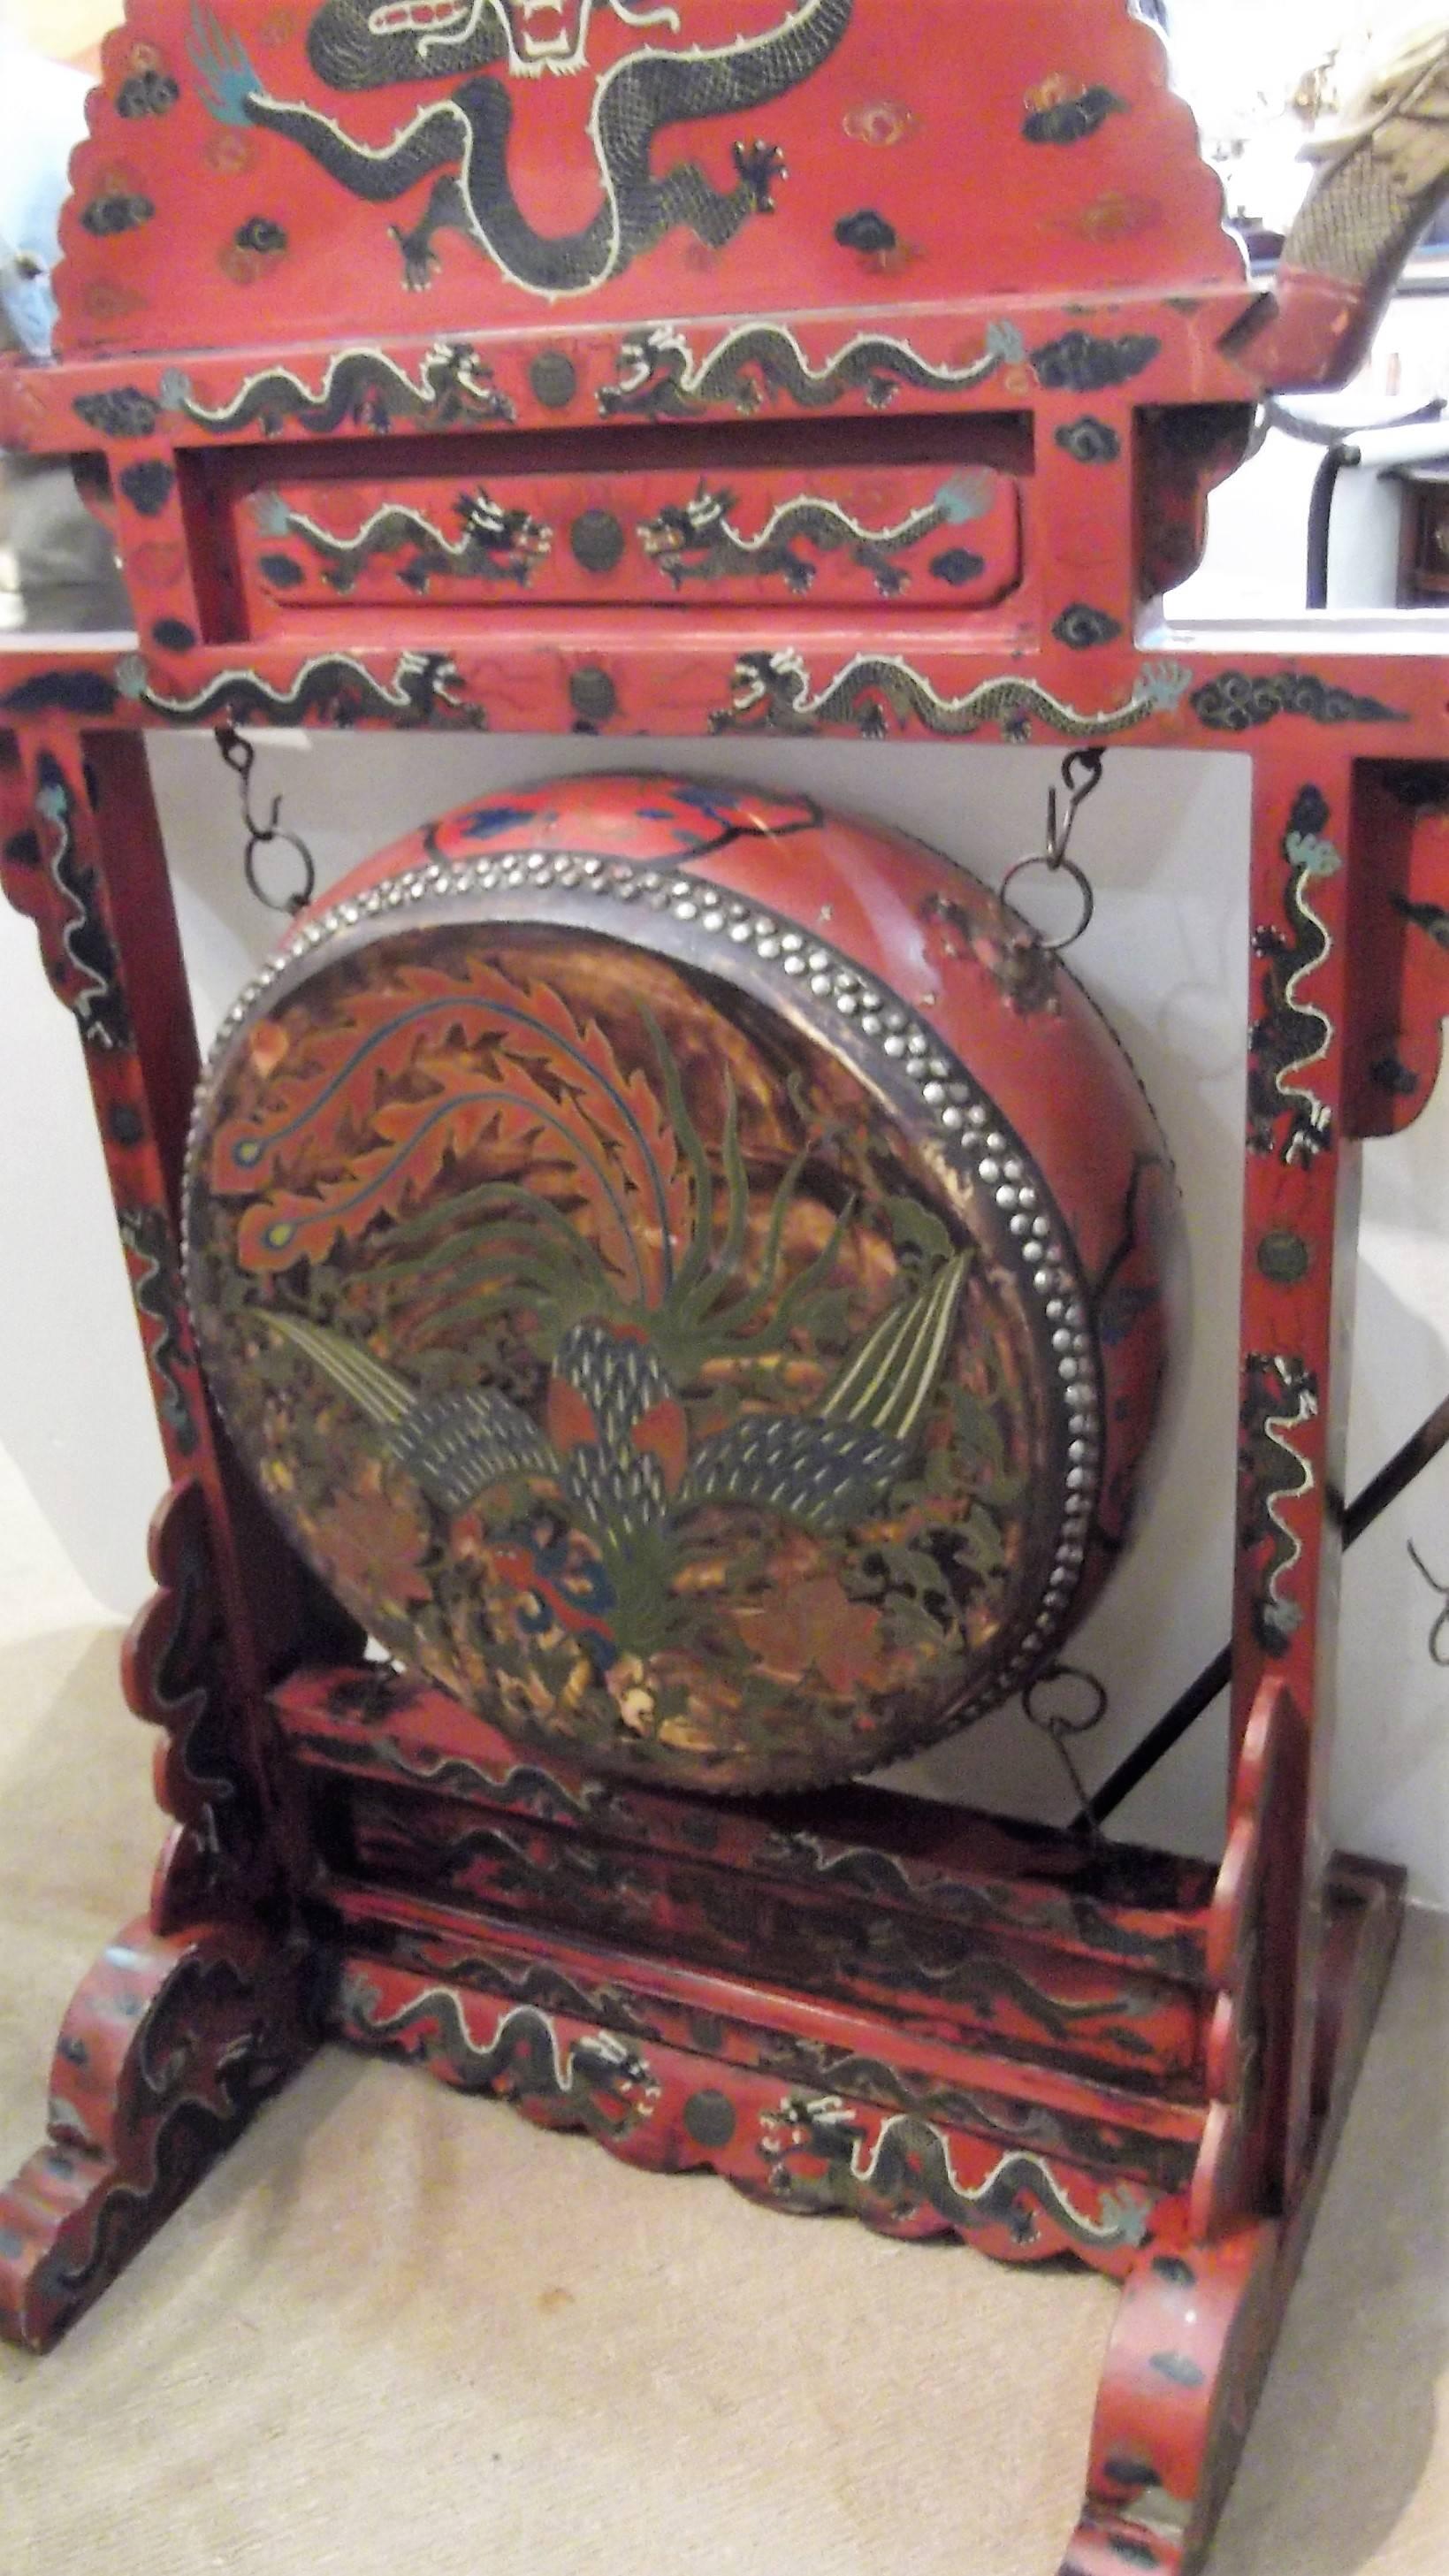 Hand painted antique Chinese temple gong in very good condition consistent with age. The gong is painted with bird of paradise, dragons and other Chinese design on a red background. Fully decorated on both sides, complete with gong Hammer. The drum